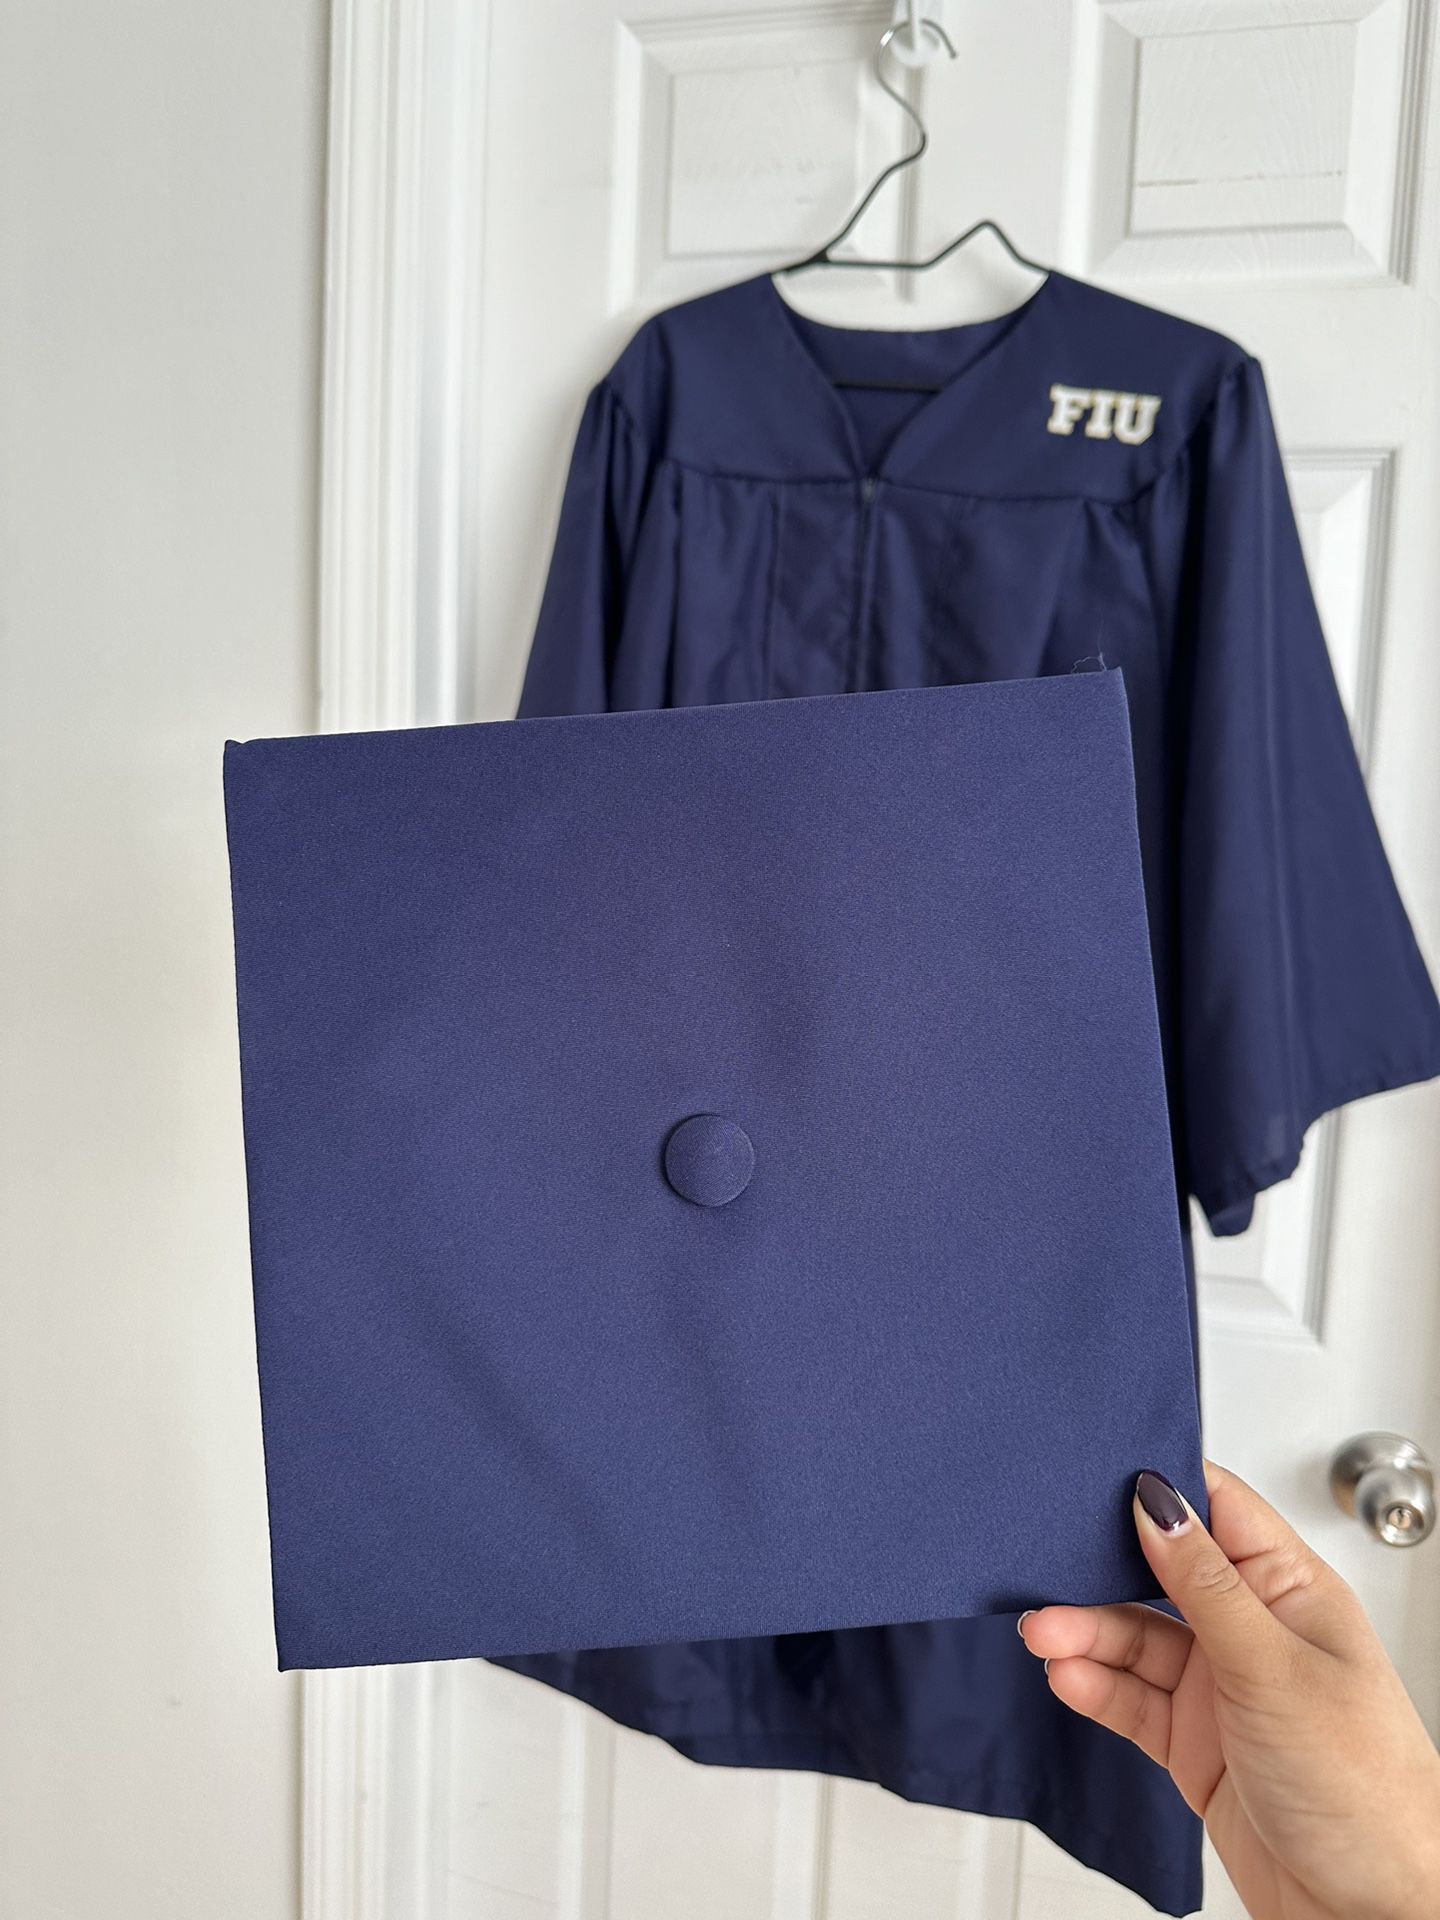 FIU Cap and Gown 